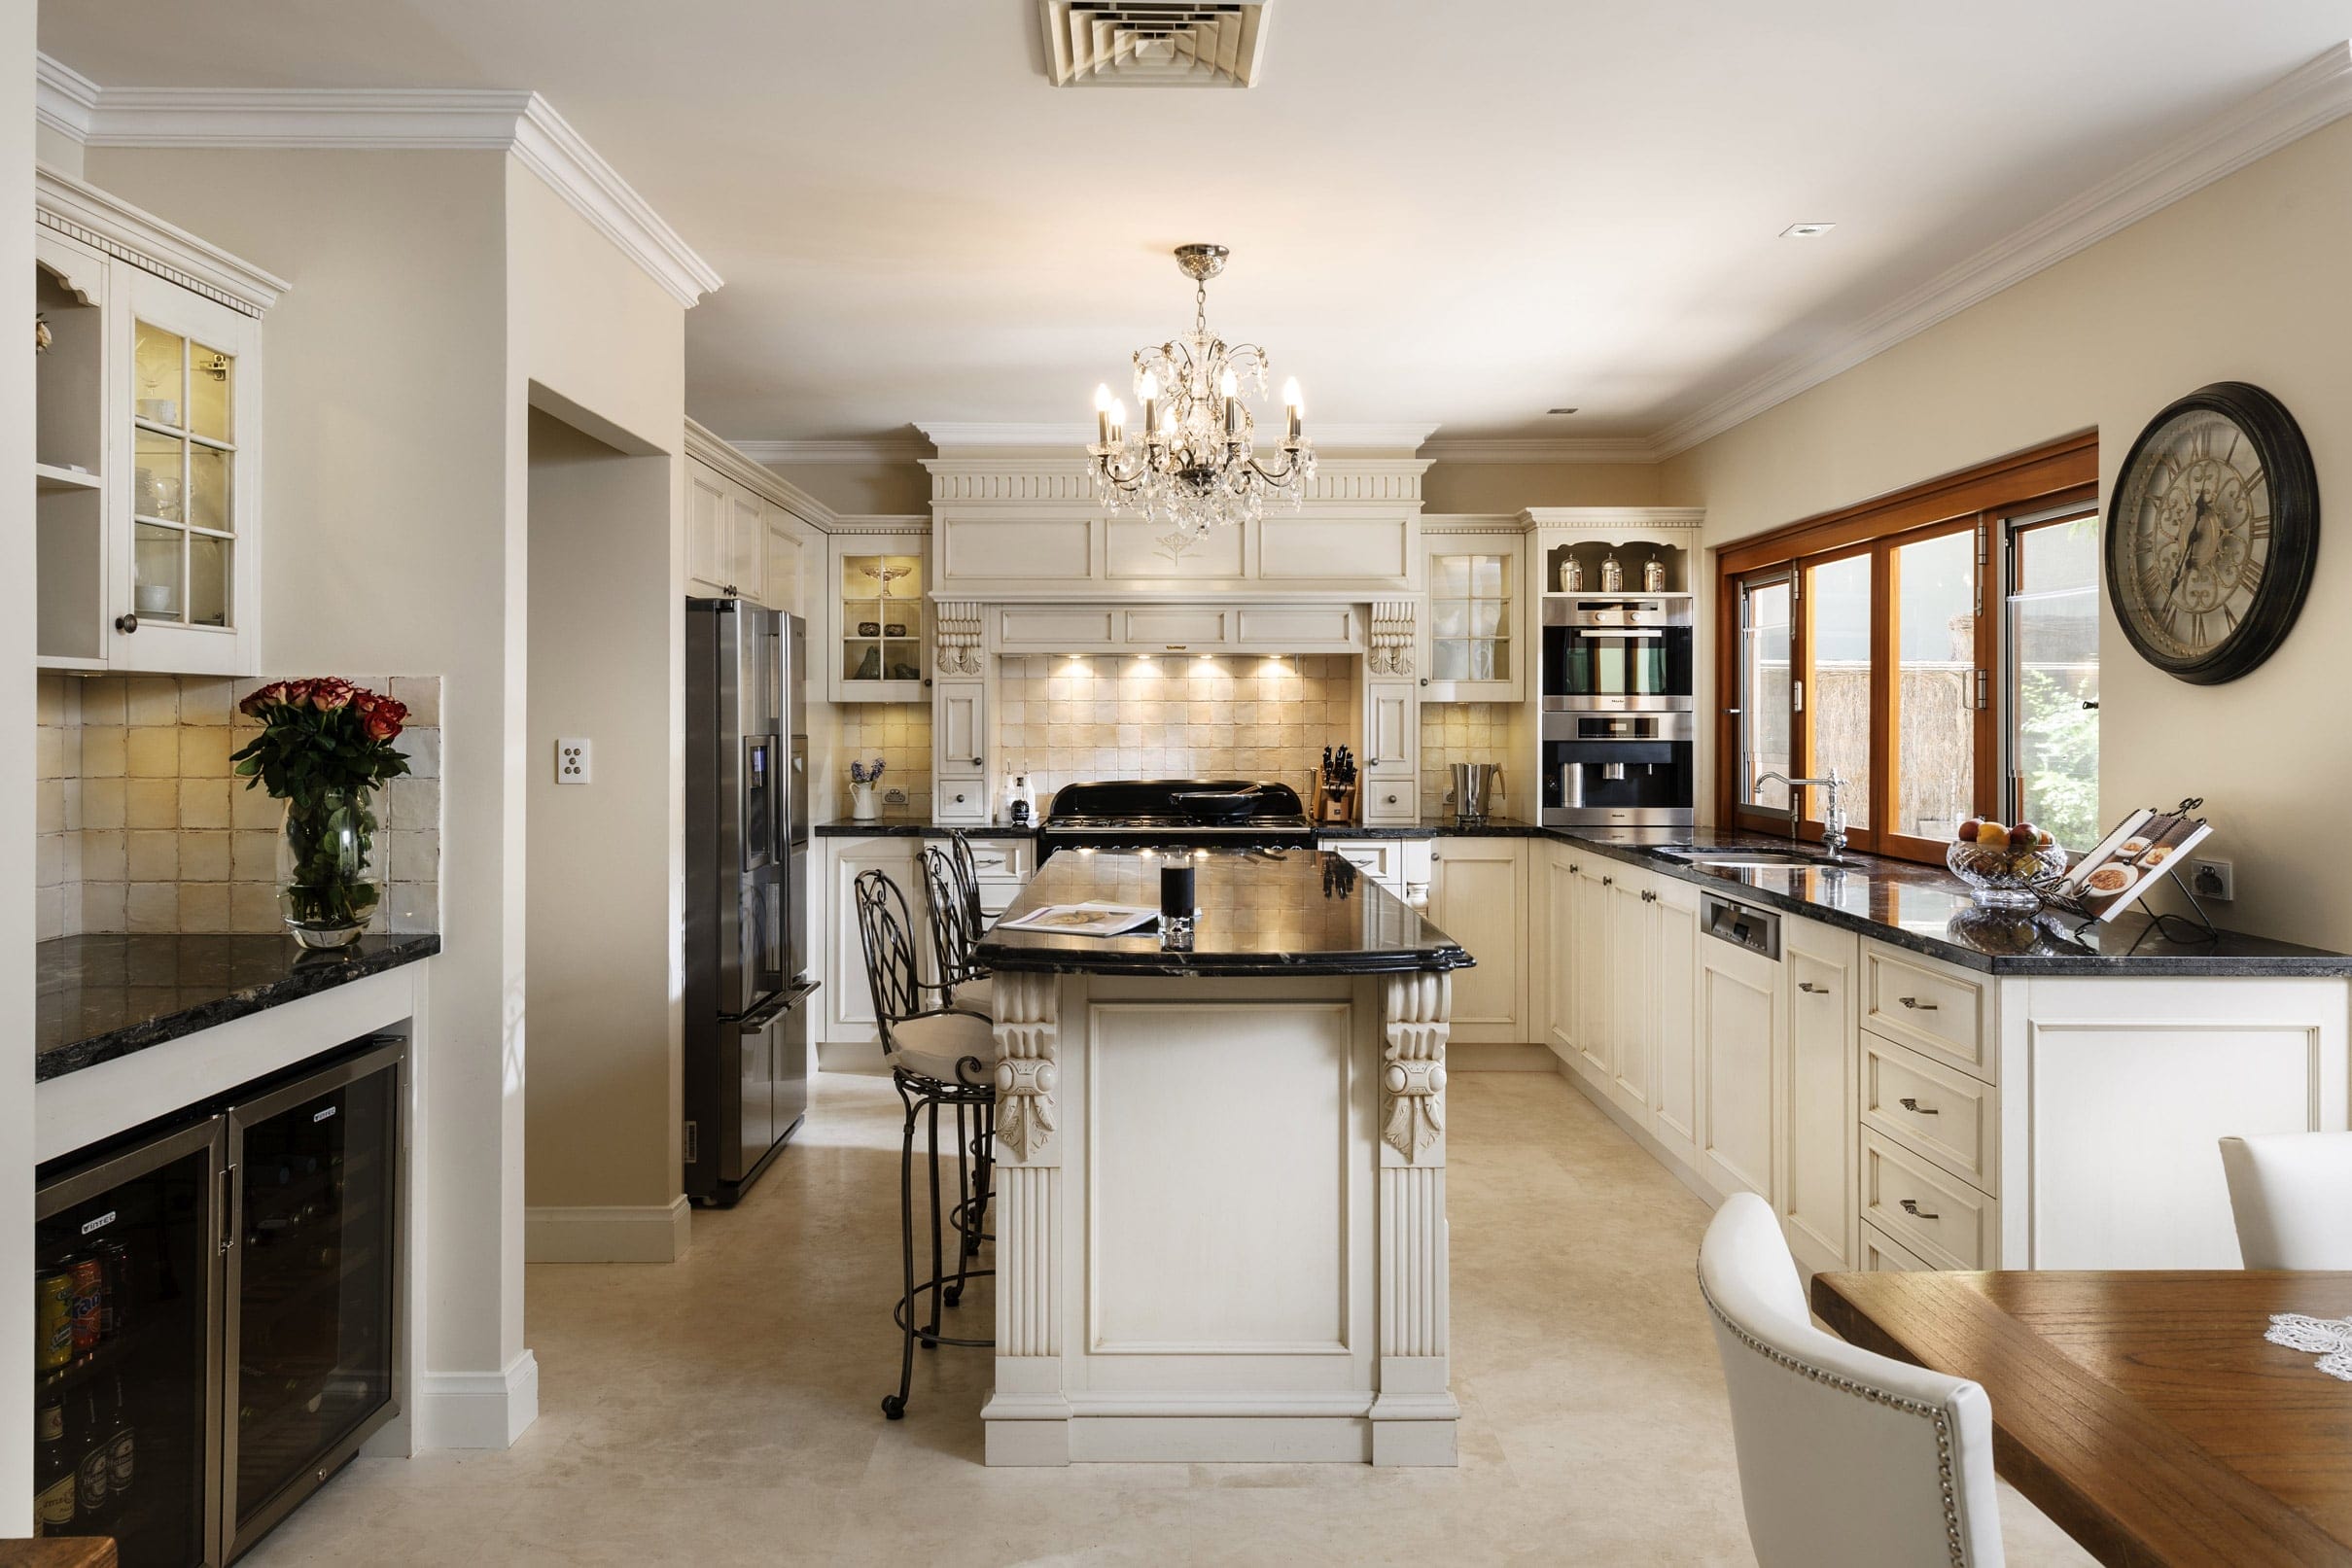 Traditional kitchens